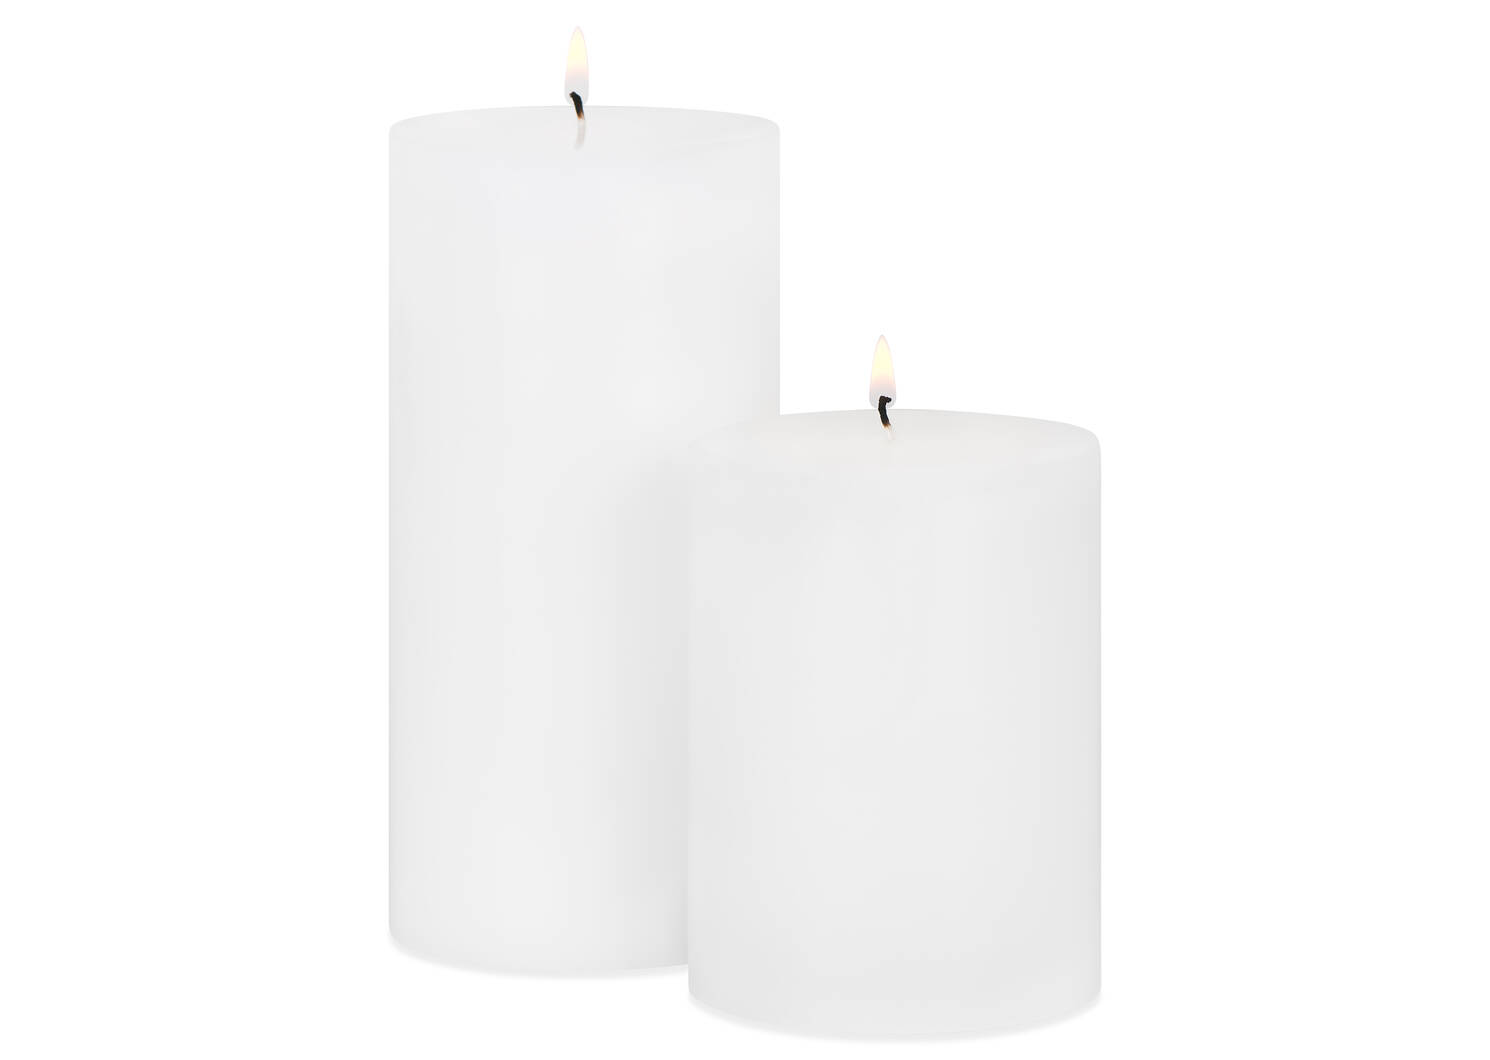 Cassa Candle 3x4 White Unscented